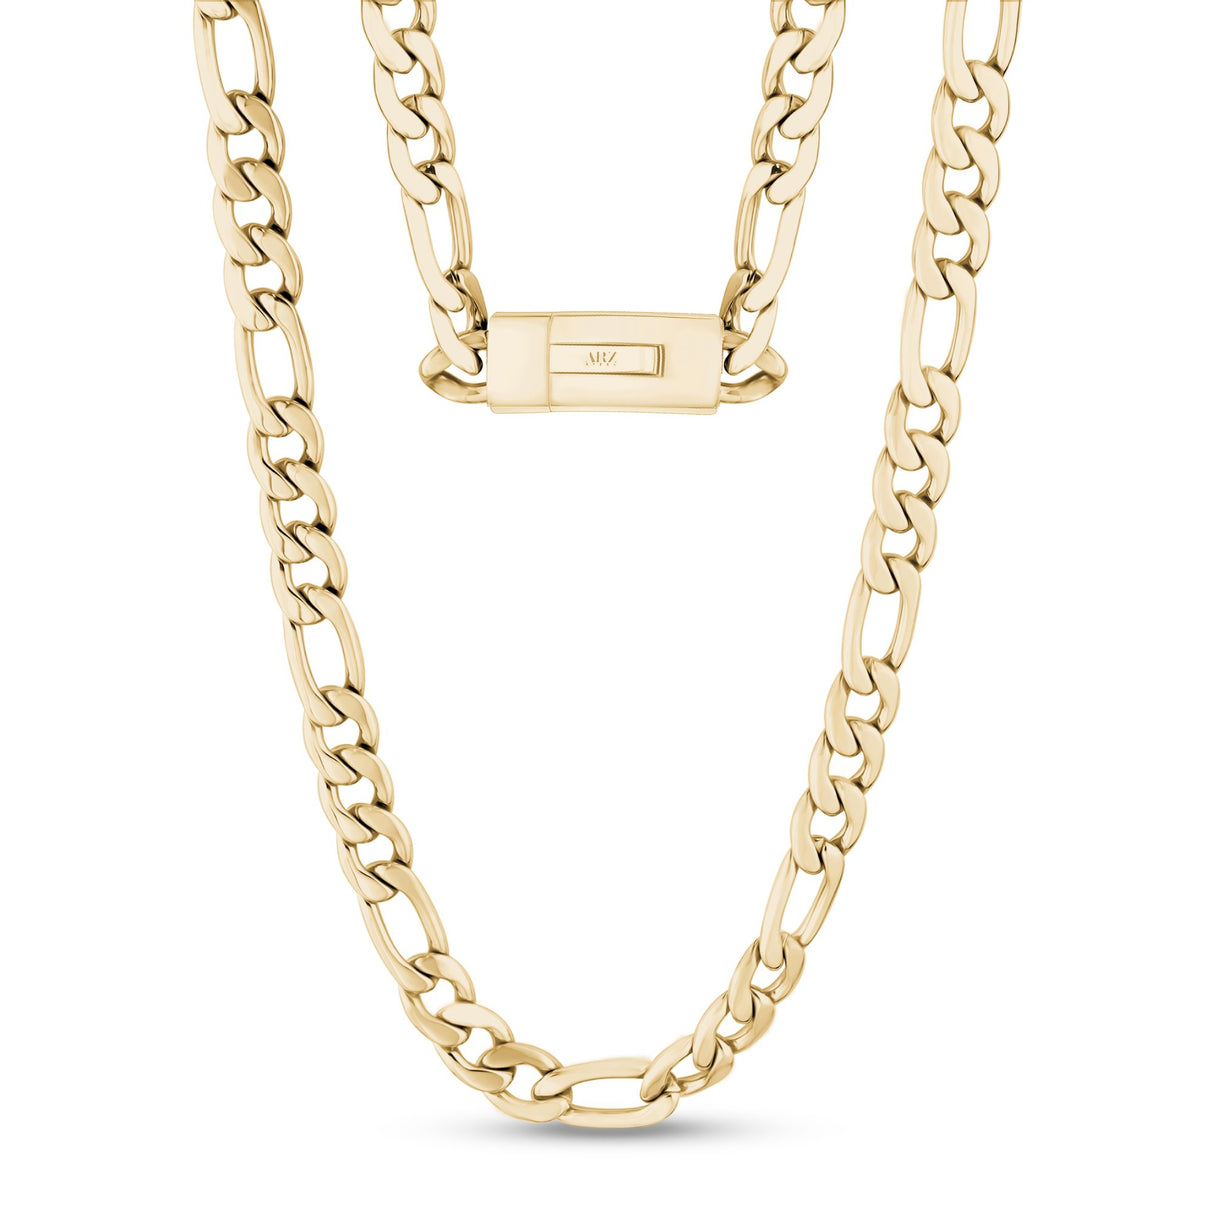 Men Necklace - 9mm Gold Figaro Link Engravable Chain